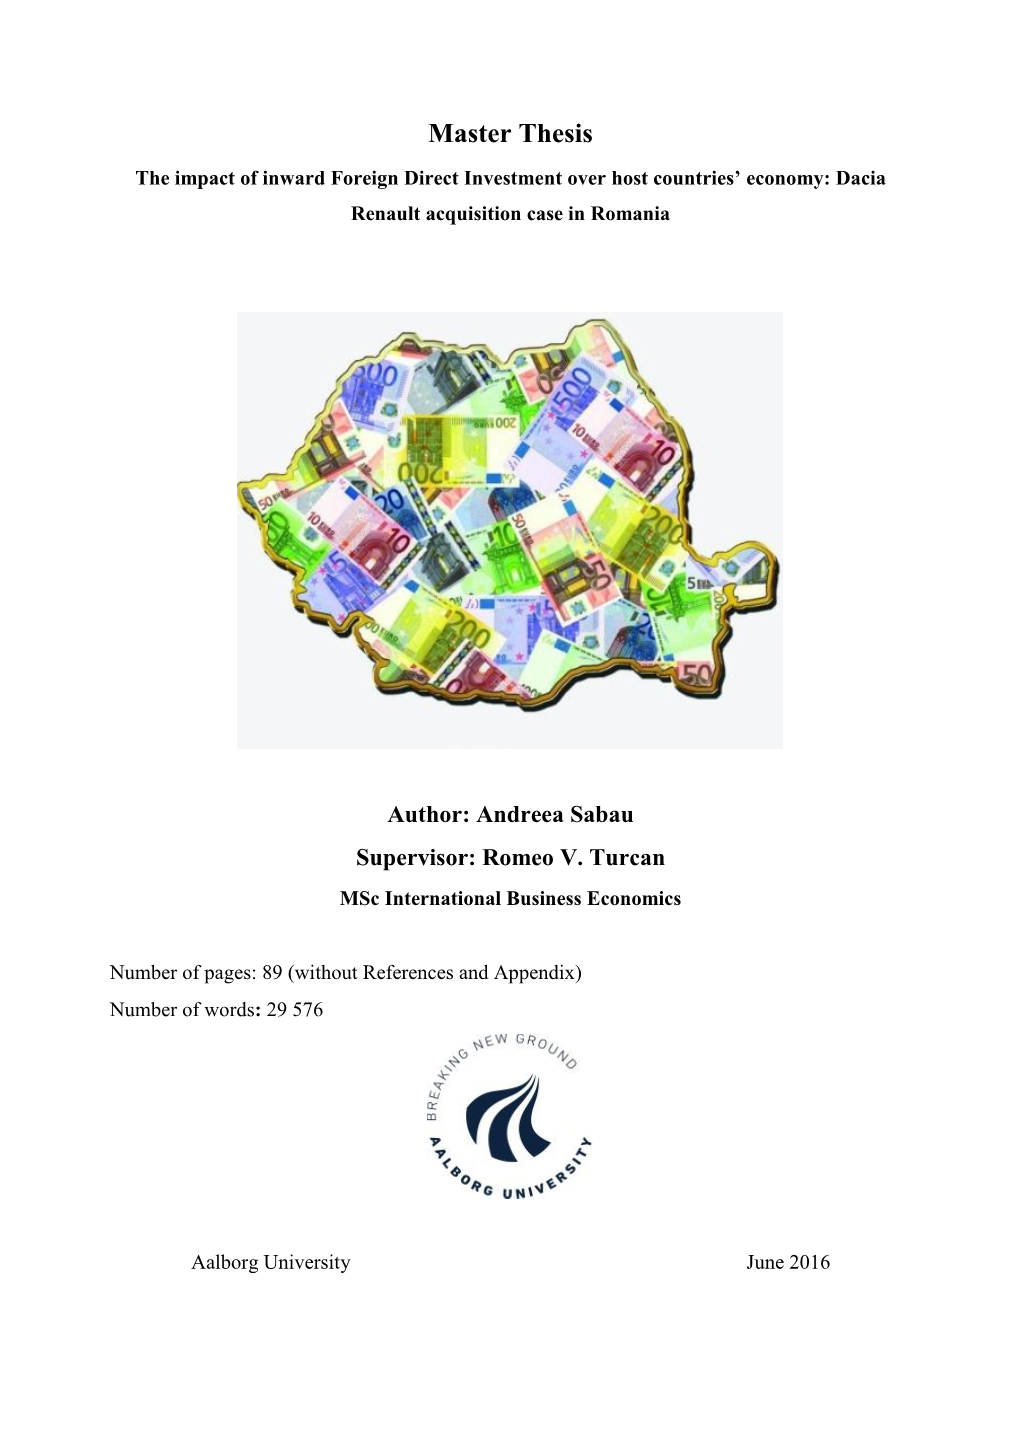 Master Thesis the Impact of Inward Foreign Direct Investment Over Host Countries’ Economy: Dacia Renault Acquisition Case in Romania